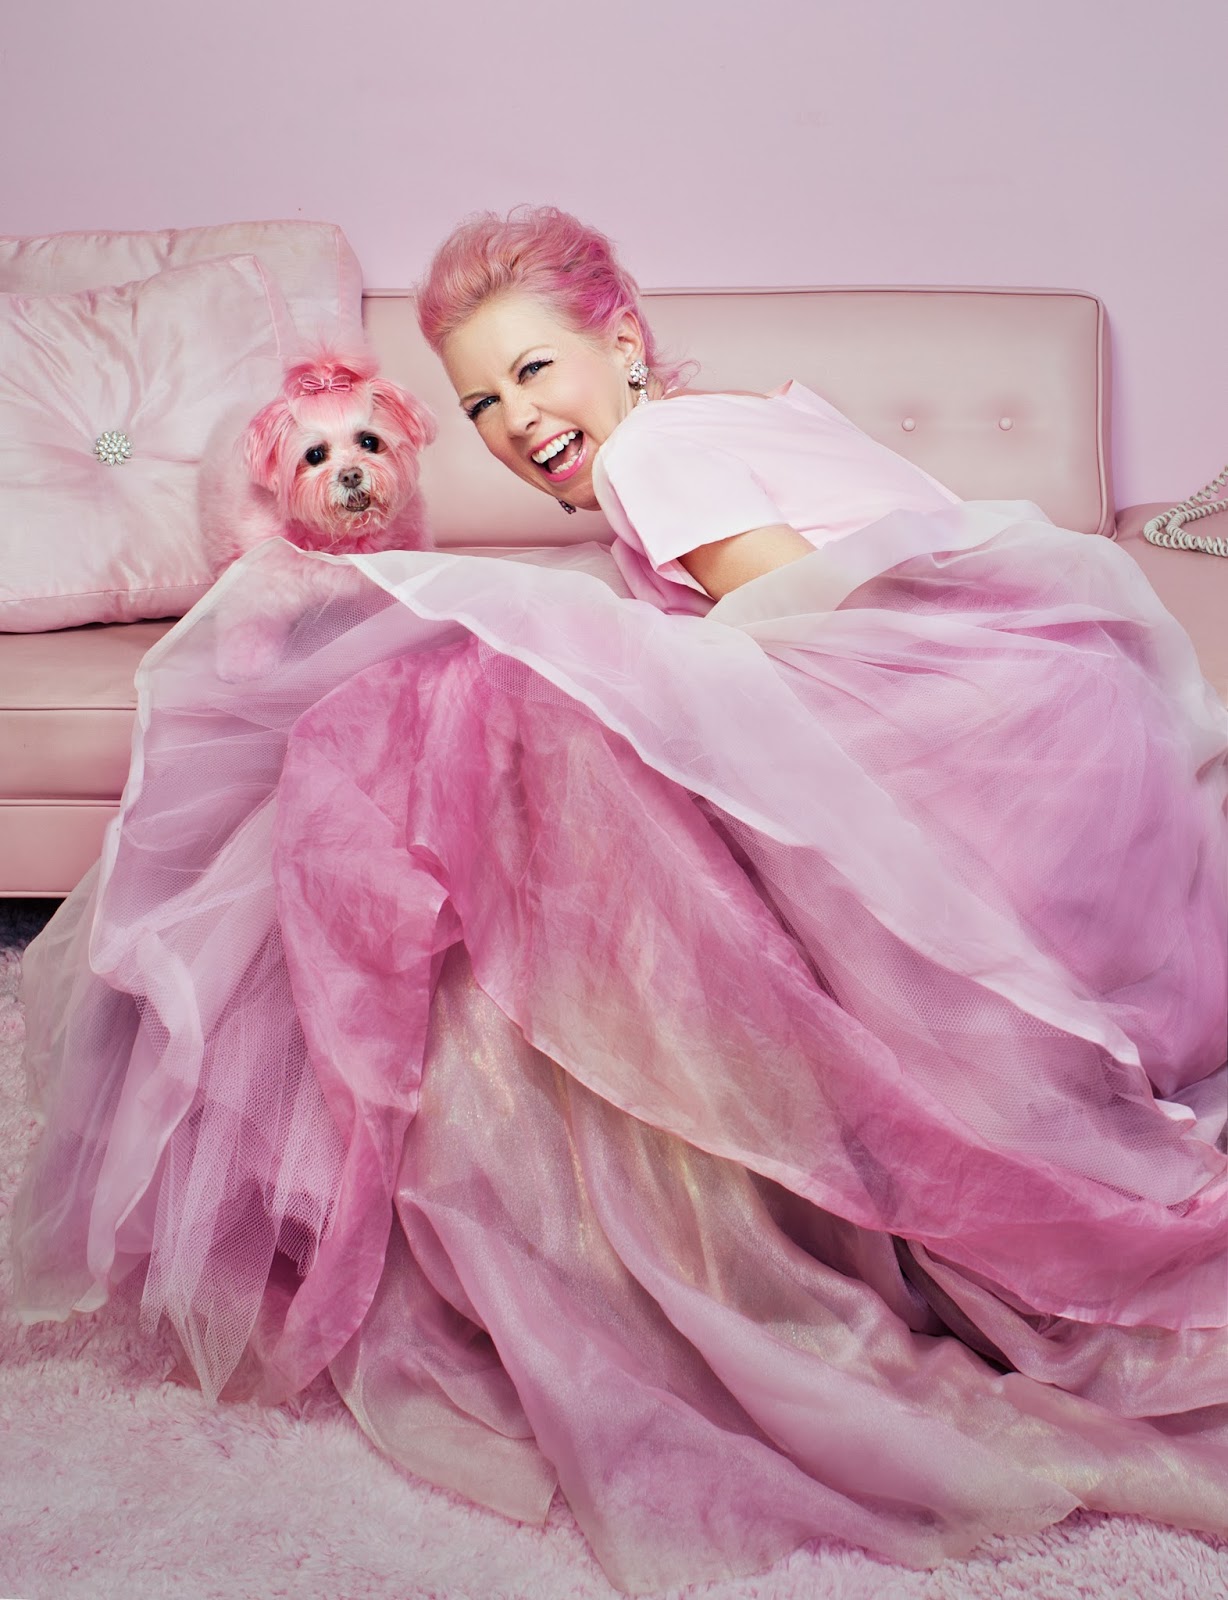 The Pink Lady Of Hollywood Is Kitten Kay Sera Pinkfection 